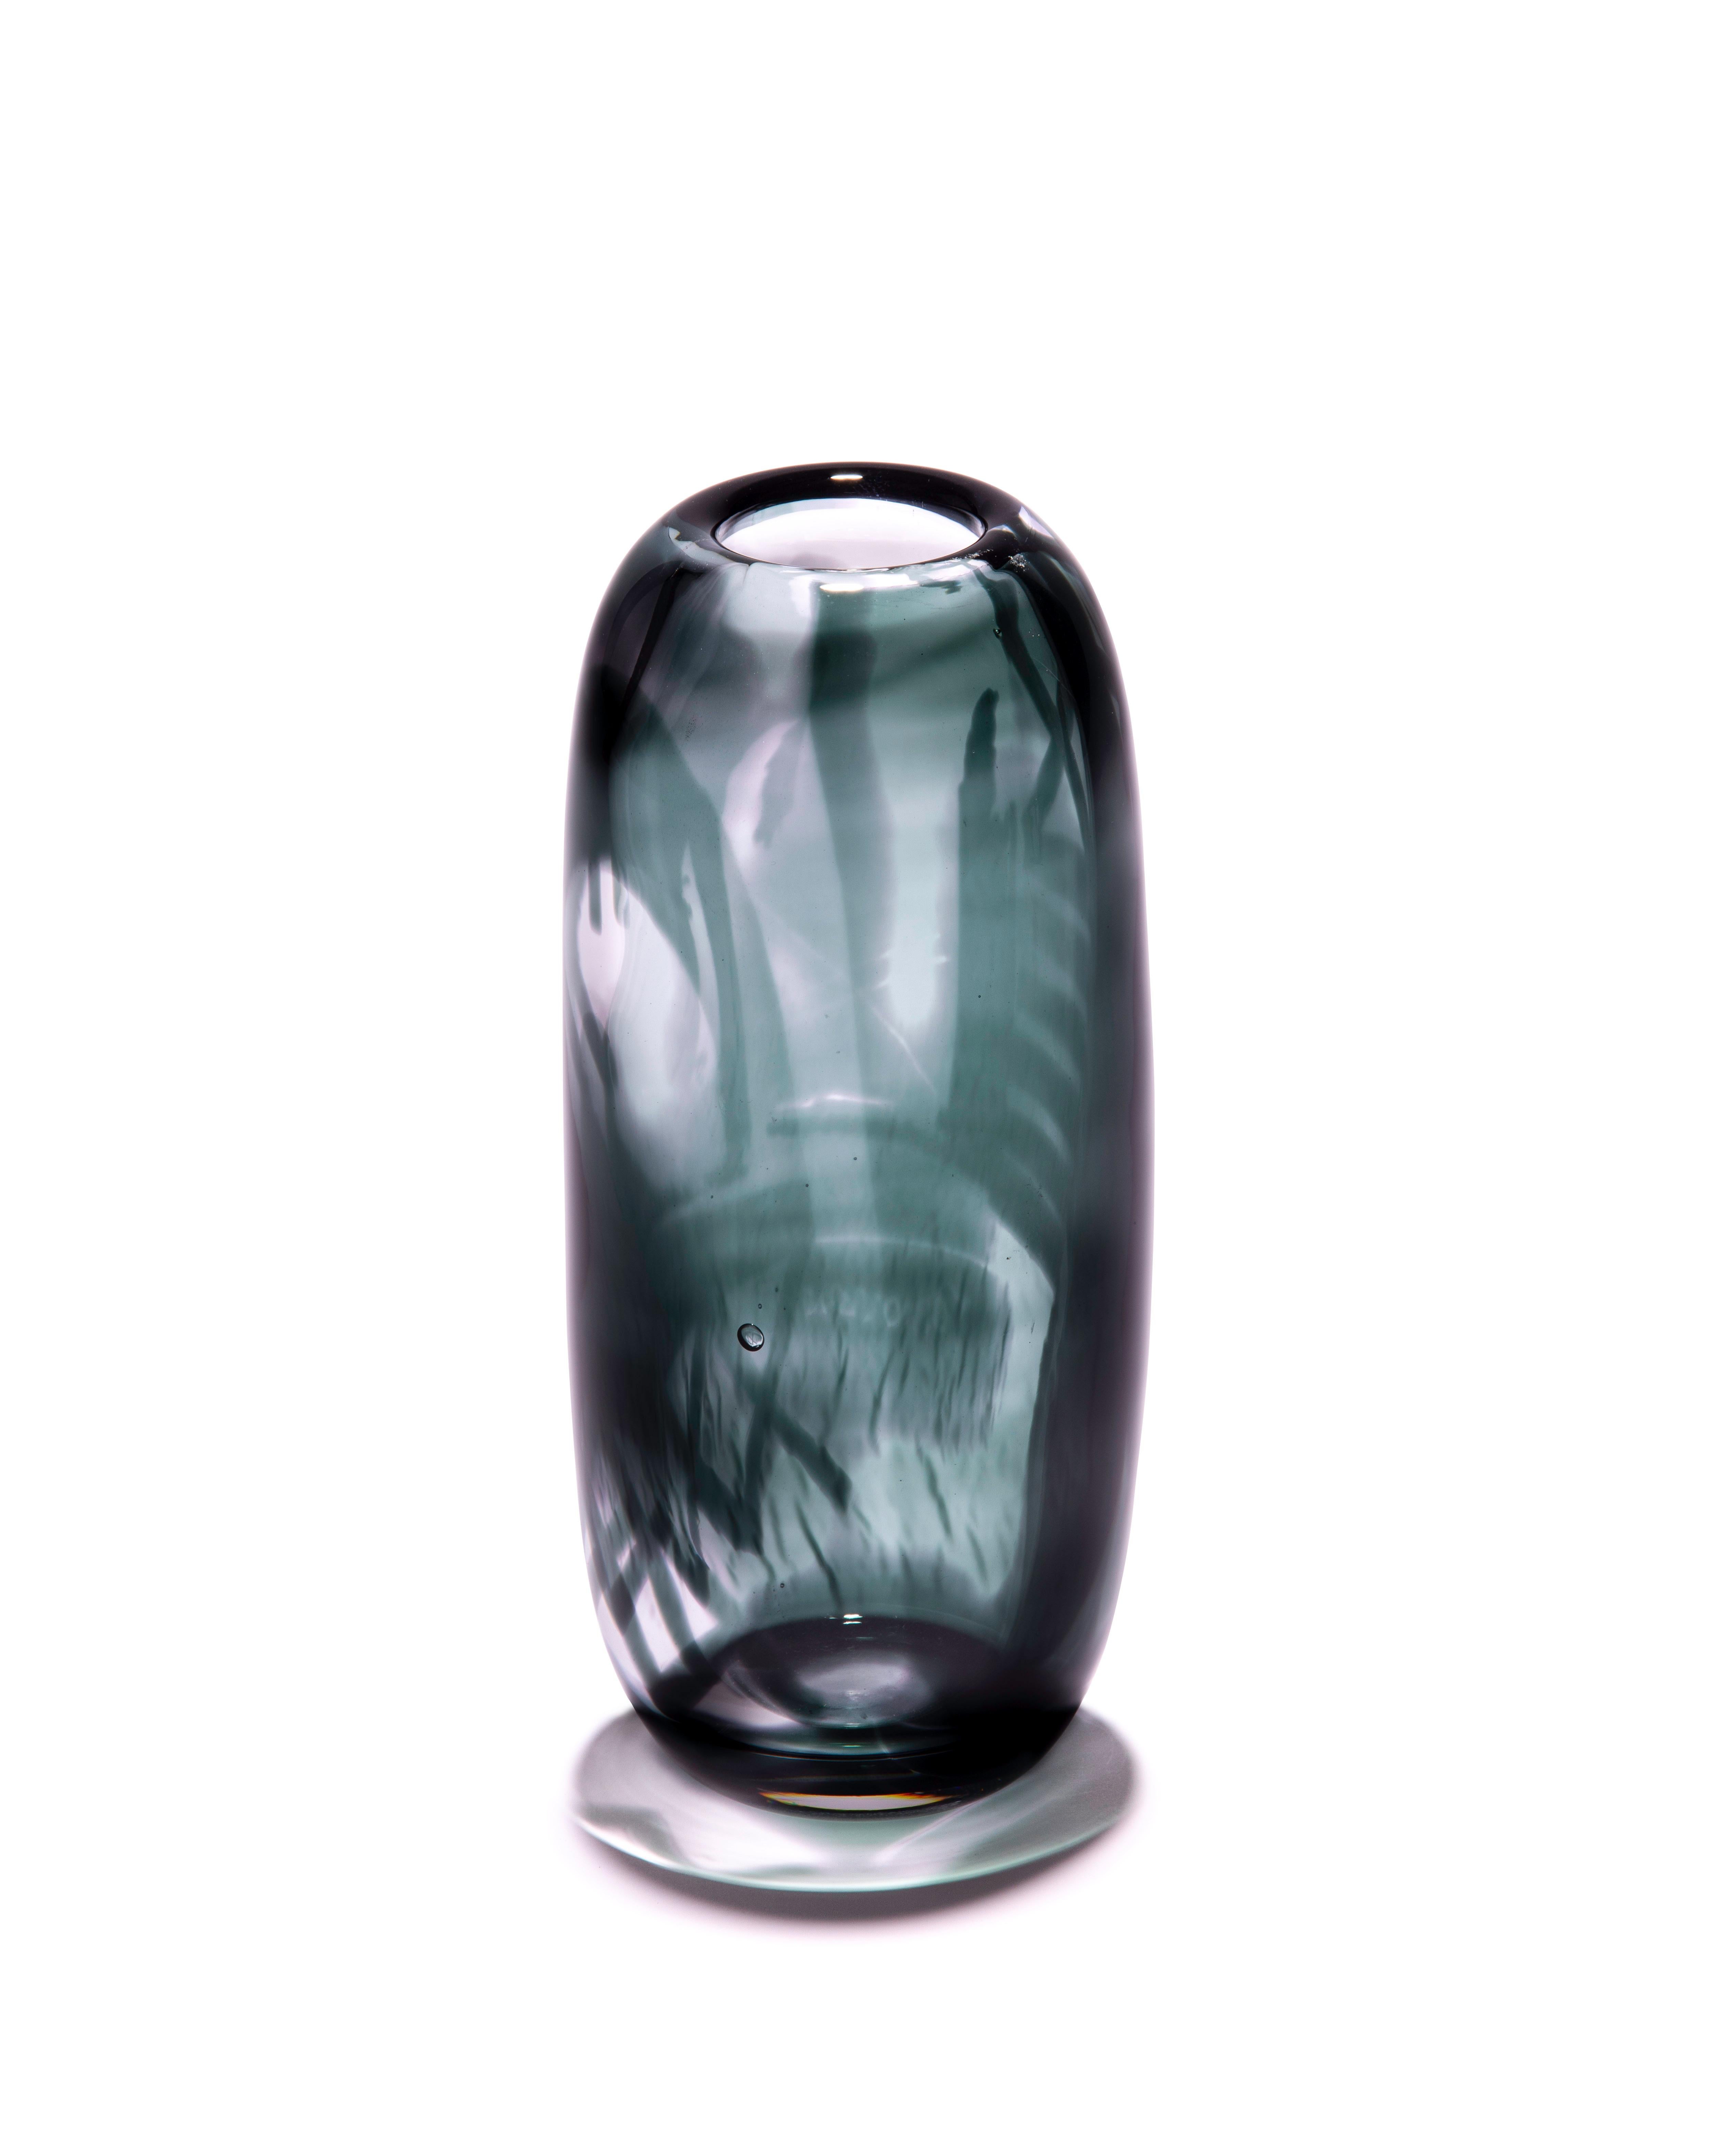 Unique green graal harvest glass vase by Tiina Sarapu
2018
Dimensions: H 27 cm
Materials: Glass

Glass in my works signifies the world between opaque and translucent, visible and invisible, material and immaterial, real and unreal. It is a